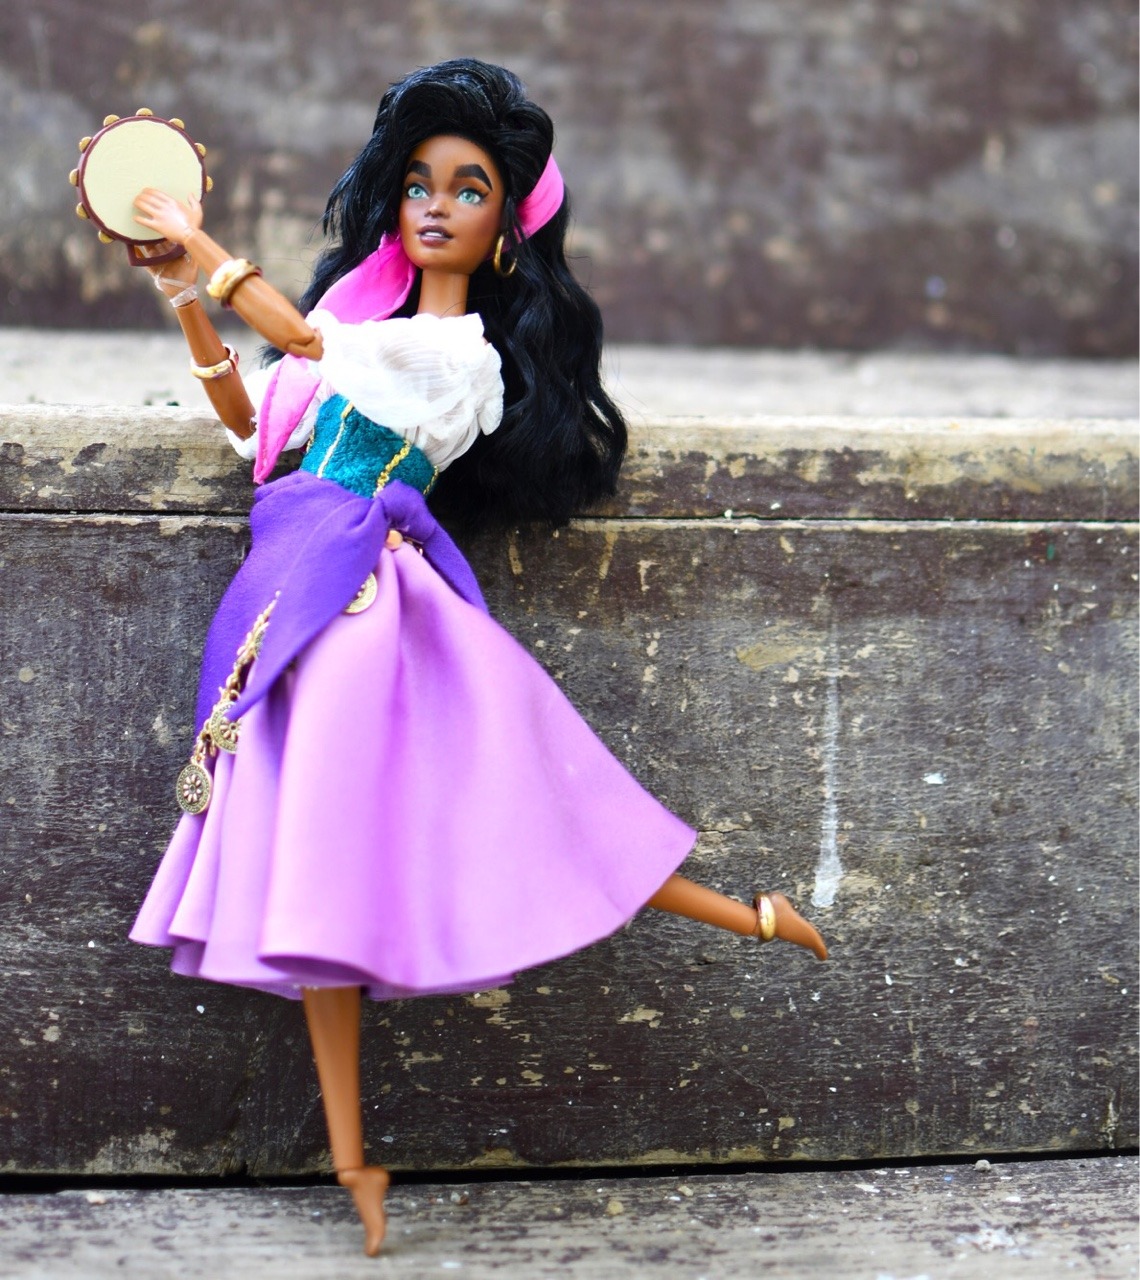 Finally was able to take decent pictures of the @barbie made to move custom Esmeralda